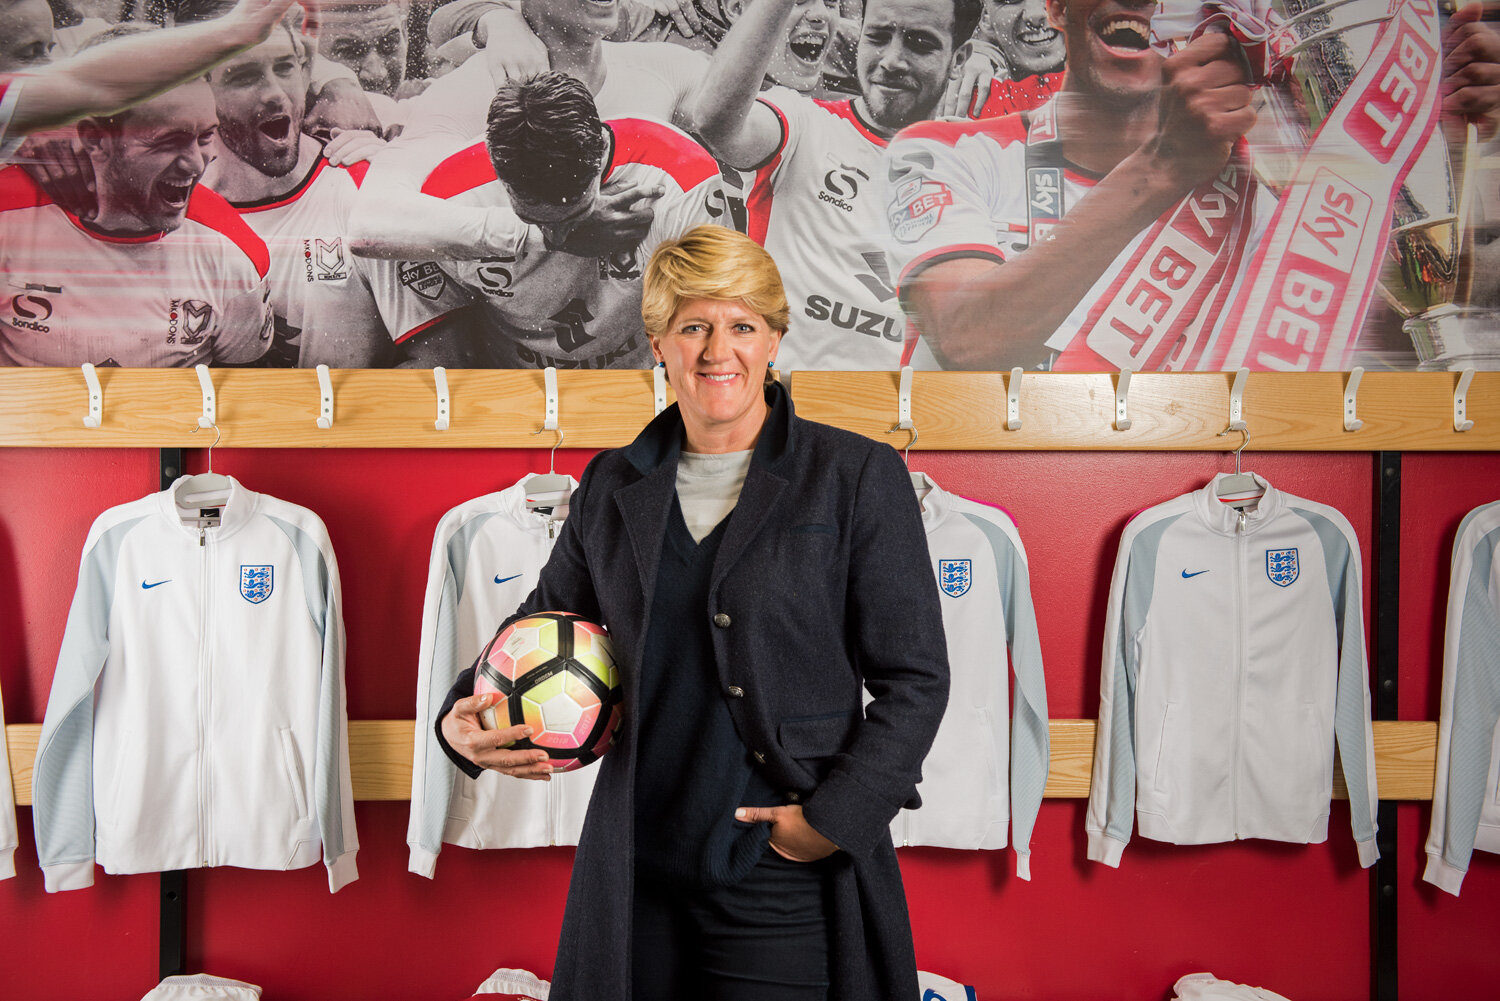 Clare Balding, broadcaster, journalist and author.  